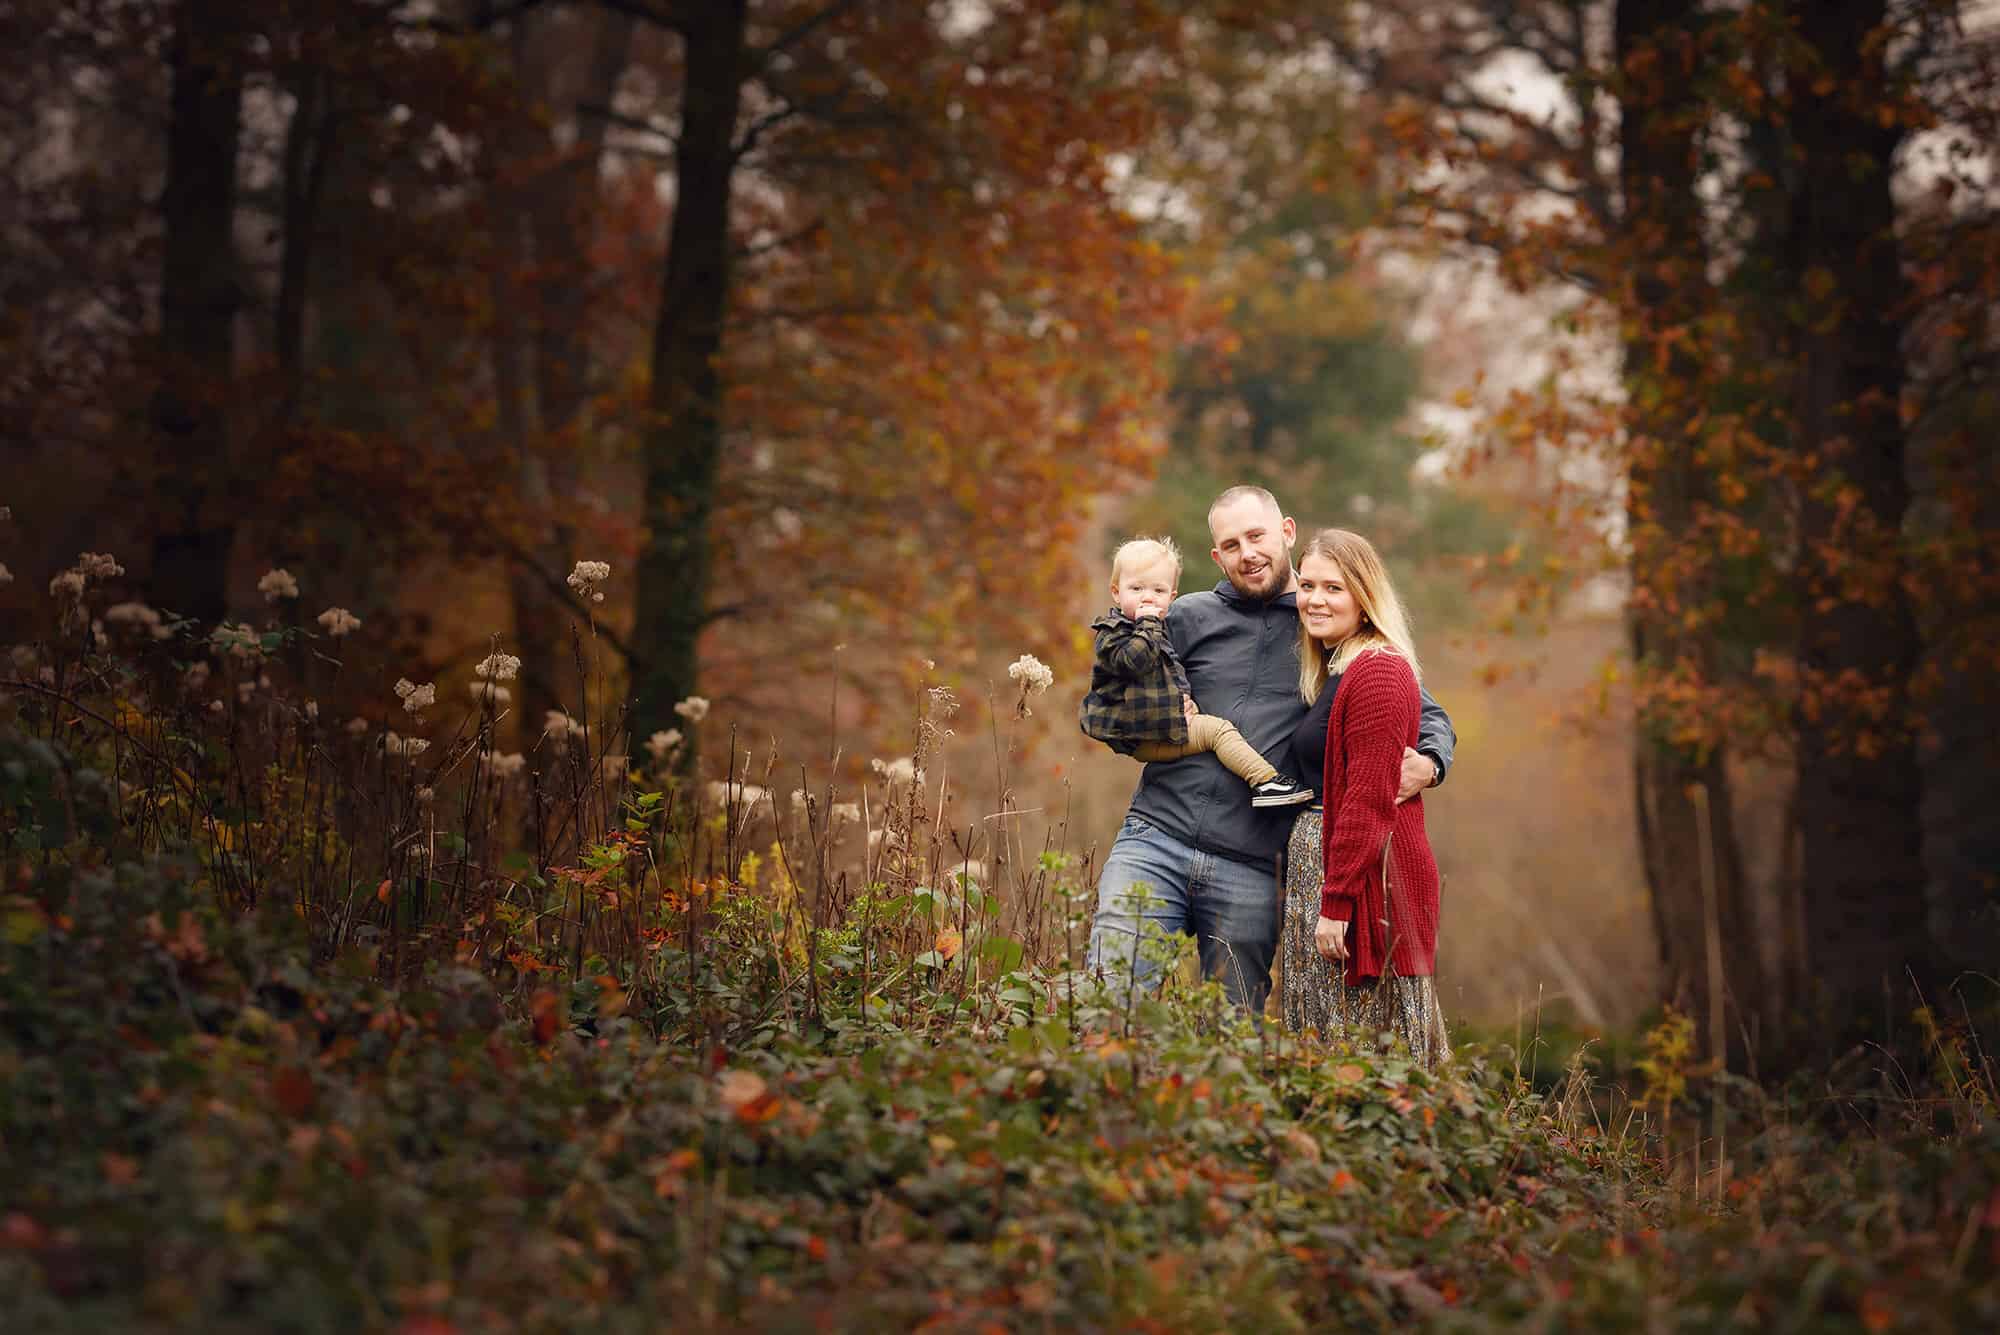 mum, dad and young boy standing in autumn woodland